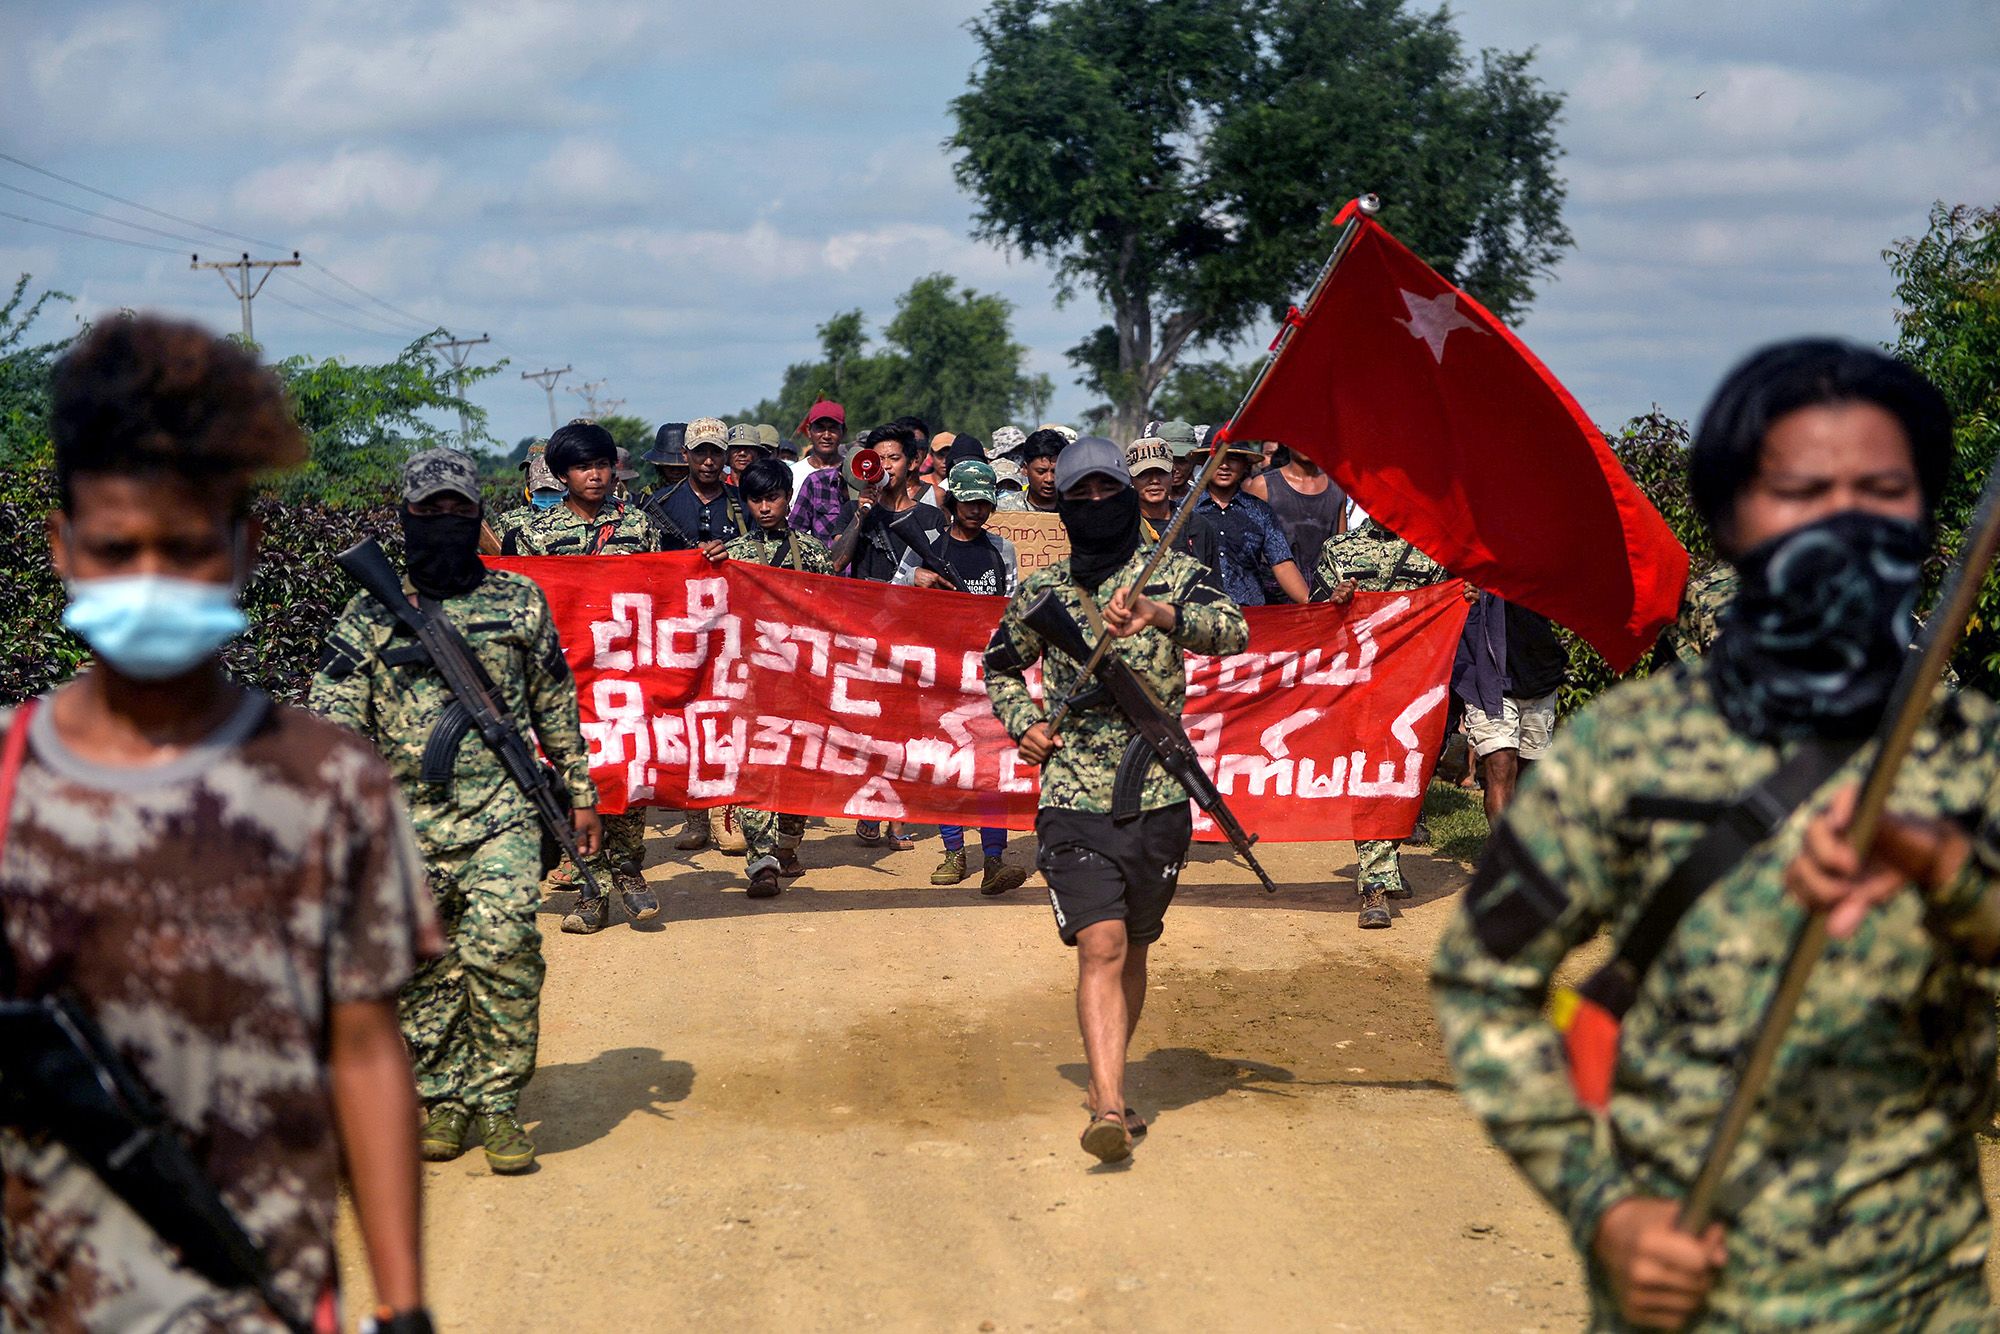 Anti-coup fighters escort protesters as they take part in a demonstration against the military coup in Sagaing, in the Sagaing Division of Myanmar on September 7, 2022. - In Myanmar's northwest Sagaing region, dozens of local Peoples Defence Forces are fighting the military and attempting to overturn the coup it carried out last year. Armed with little more than homemade weapons and knowledge of the local terrain, some of these groups have surprised the military with their effectiveness, analysts say. - TO GO WITH 'MYANMAR-CONFLICT-COUP' (Photo by AFP) / TO GO WITH 'MYANMAR-CONFLICT-COUP' (Photo by STR/AFP via Getty Images)